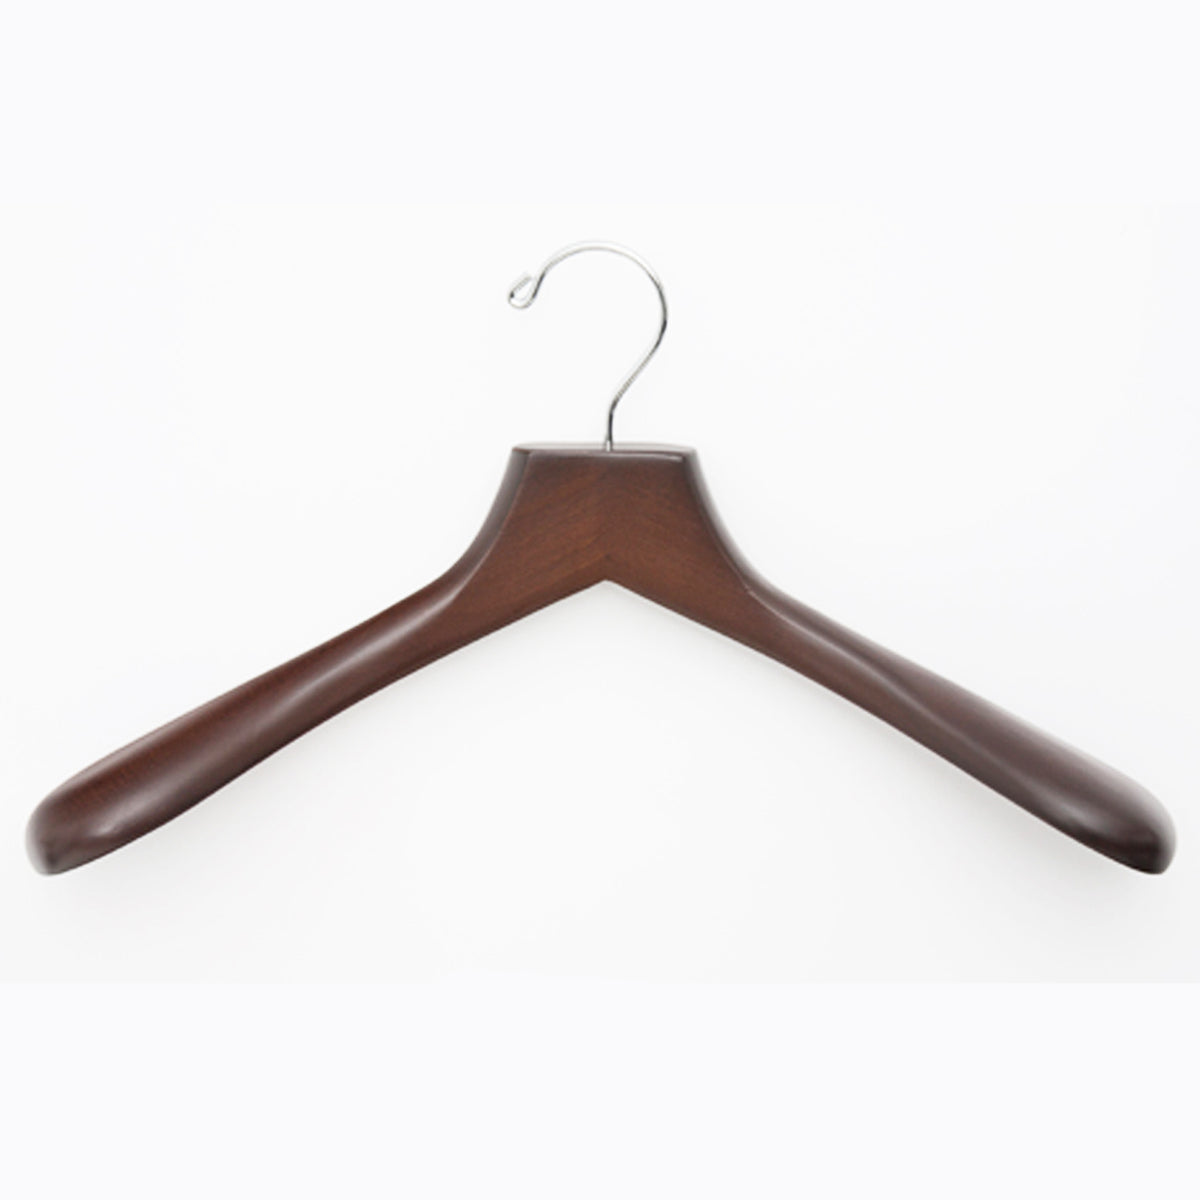 A Luxury Wooden Jacket Hanger by KirbyAllison.com featuring tailor-made shape and drape, providing essential support for luxury jackets on a white background.